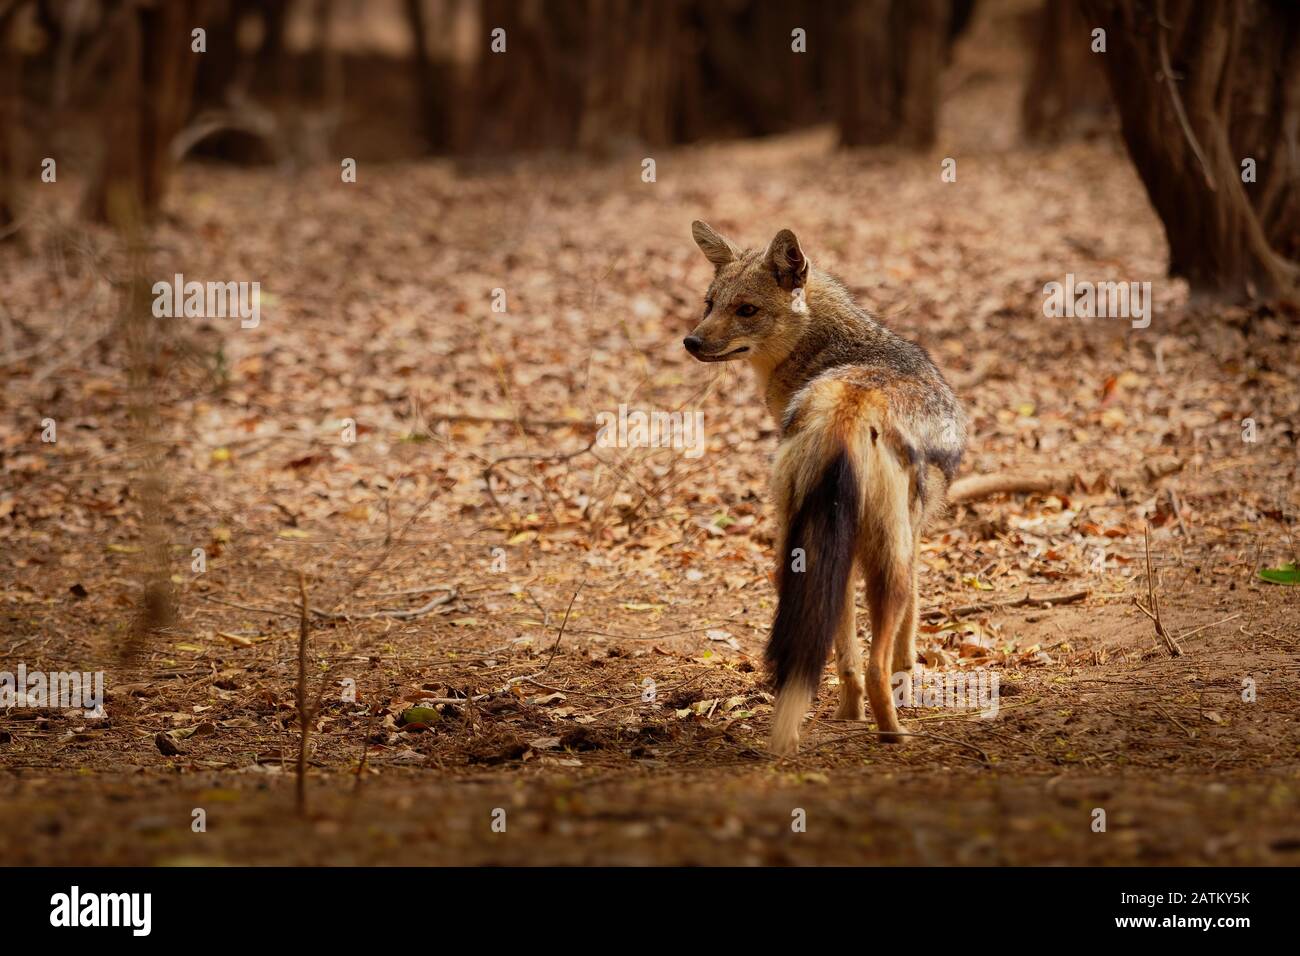 Side-striped Jackal - Canis adustus species of jackal, native to eastern and southern Africa, primarily dwells in woodland and scrub areas, related to Stock Photo